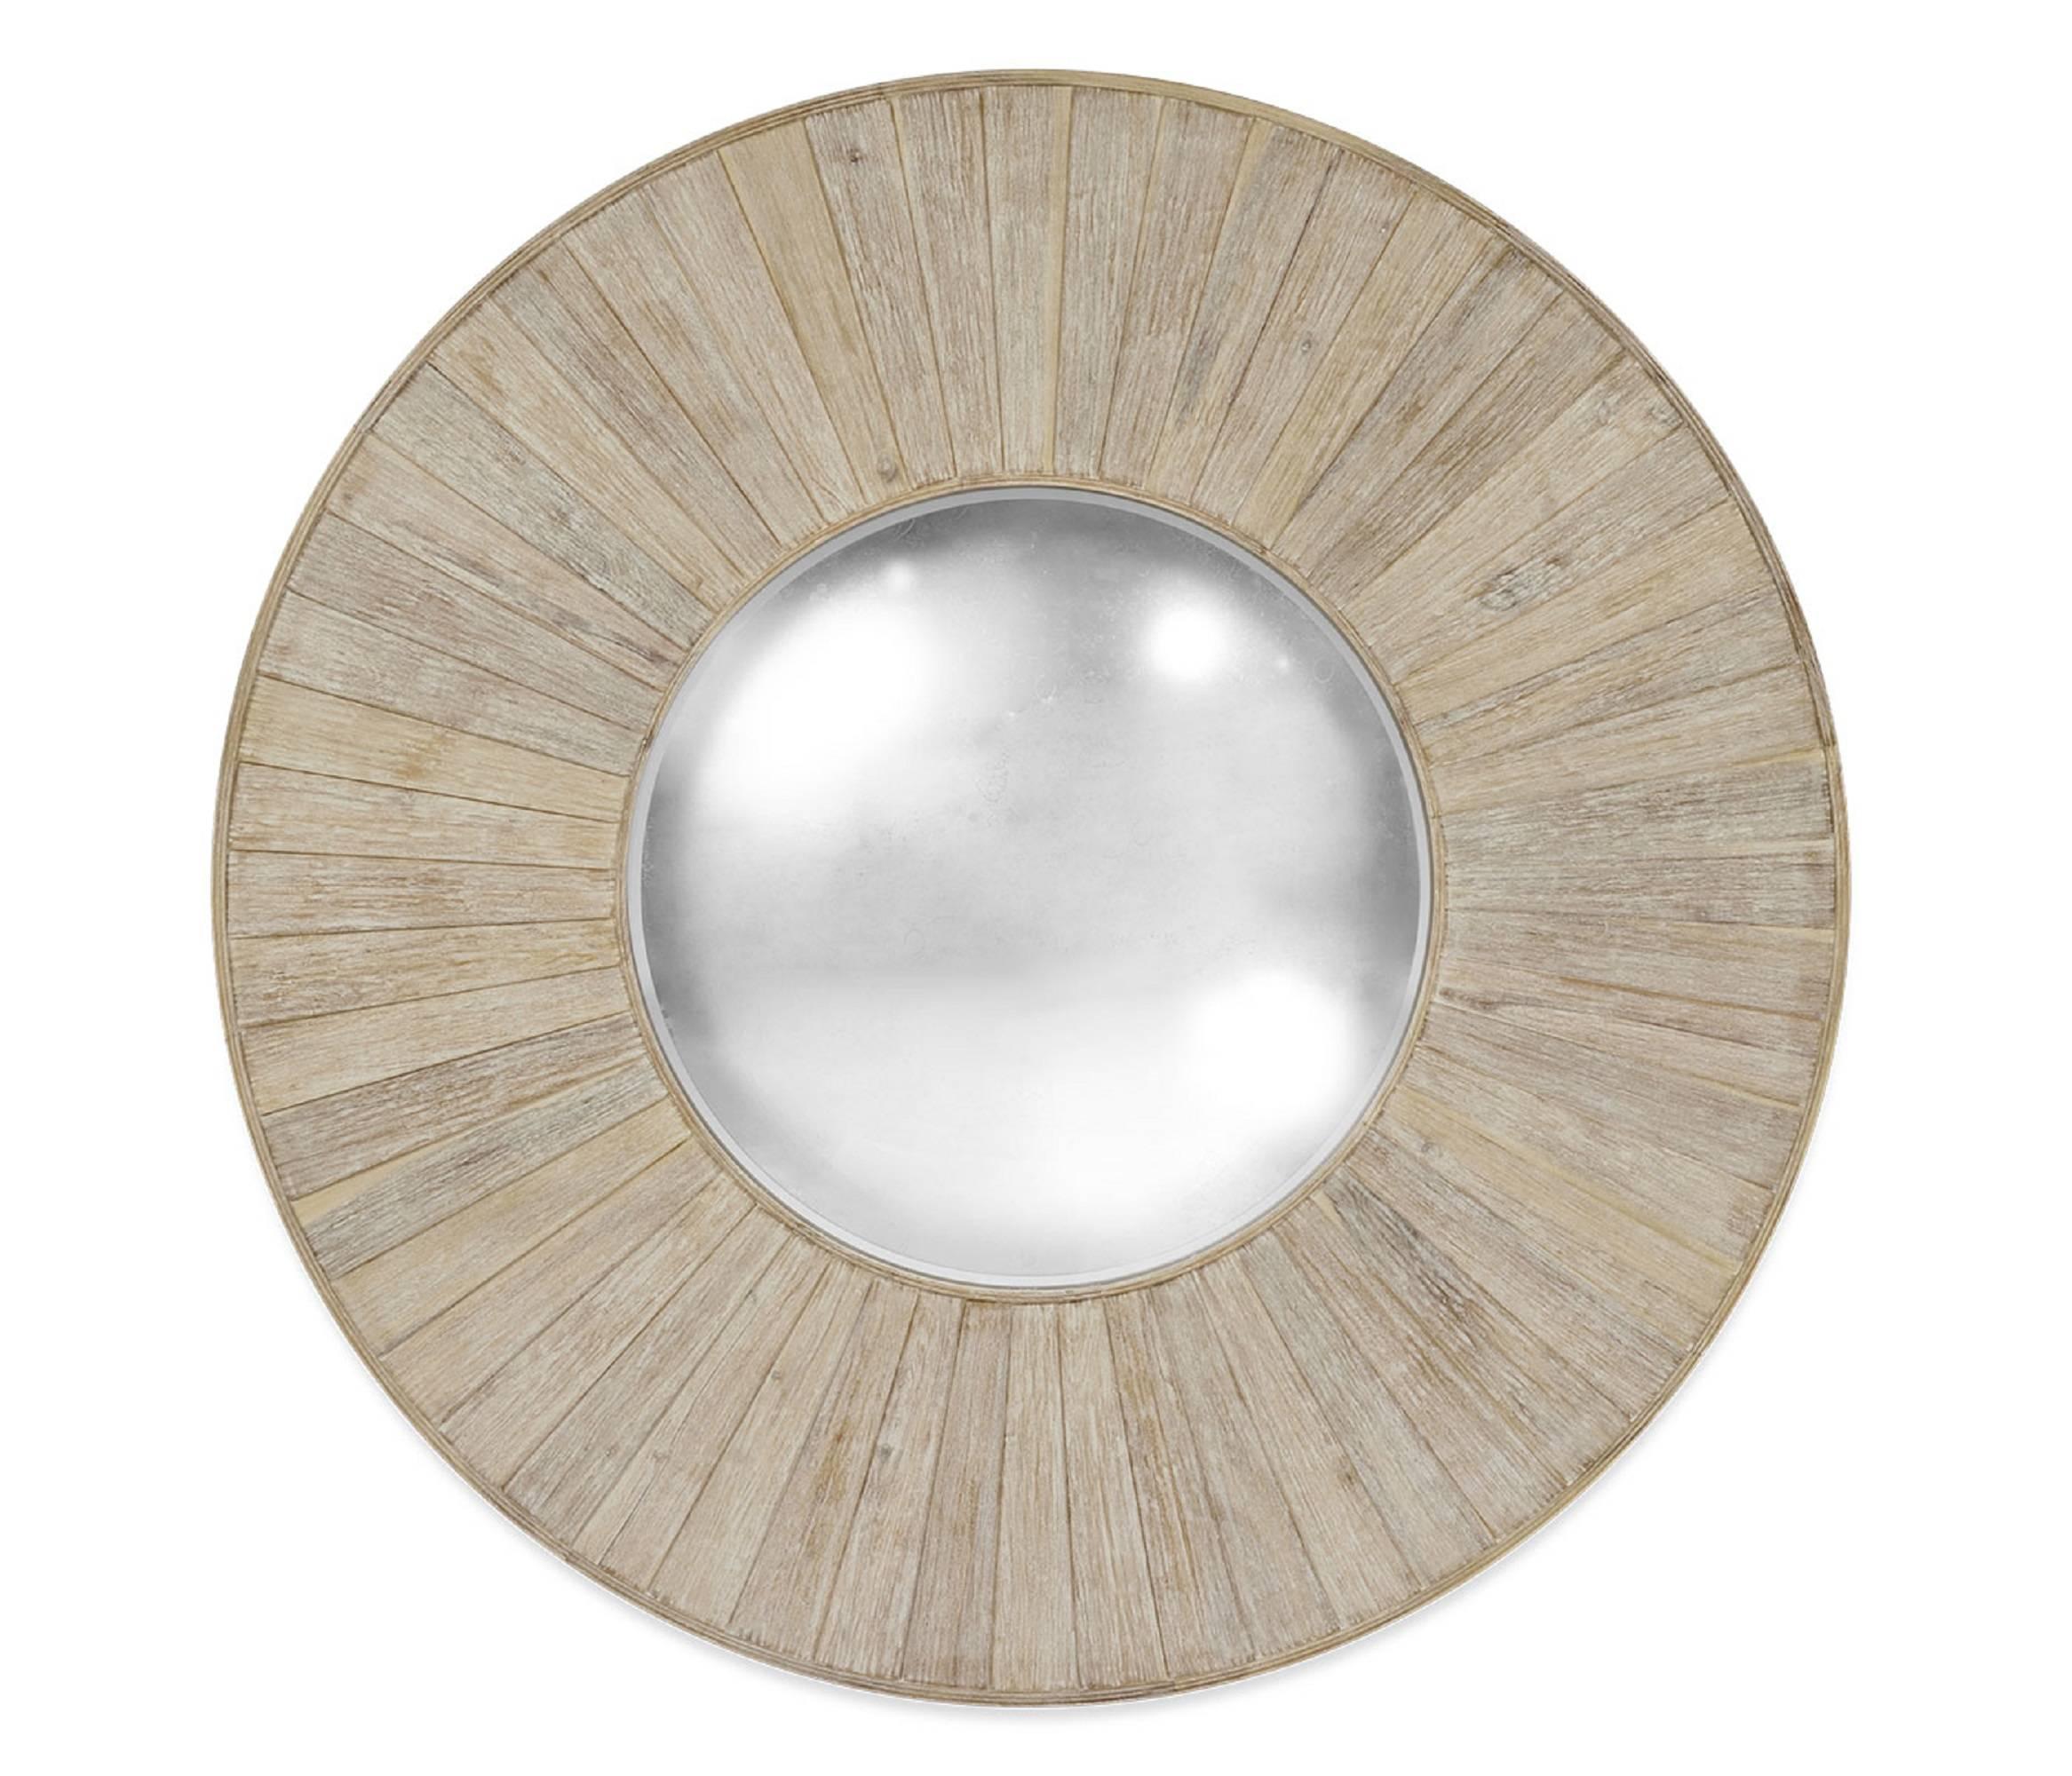 Large acacia wood mirror, available in two sizes,
60 and 40